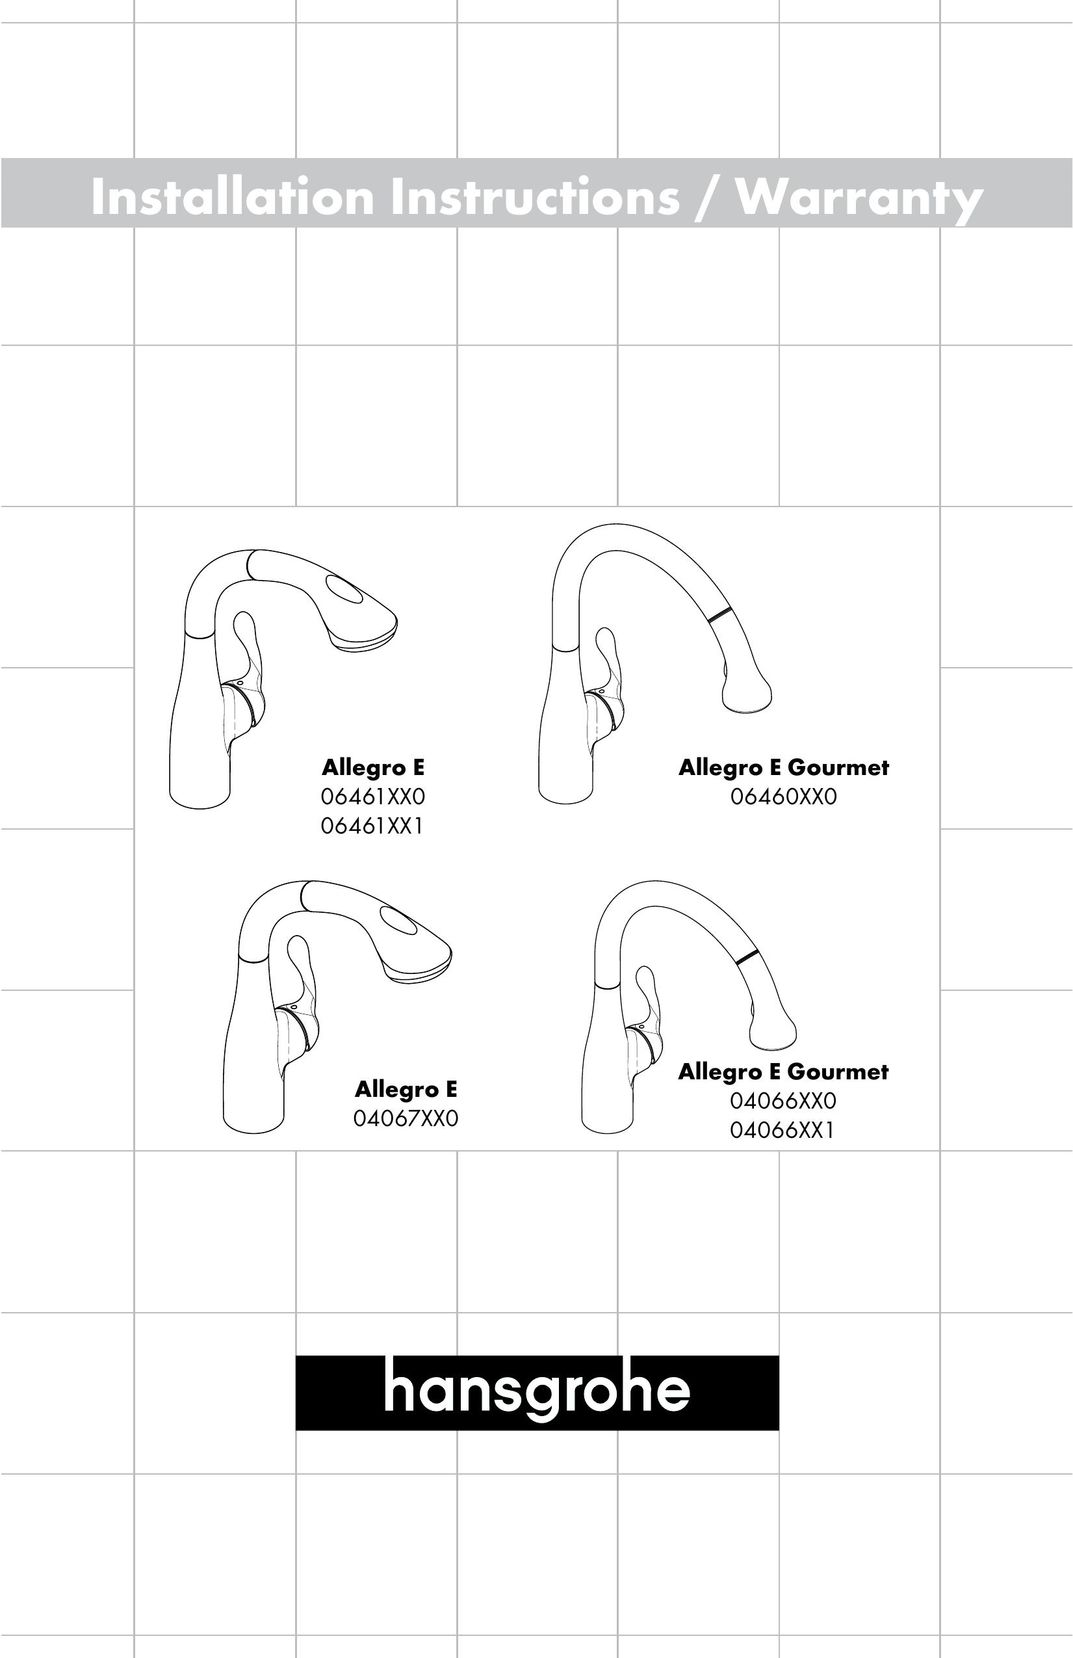 Allegro Industries 04067XX0 Plumbing Product User Manual (Page 1)